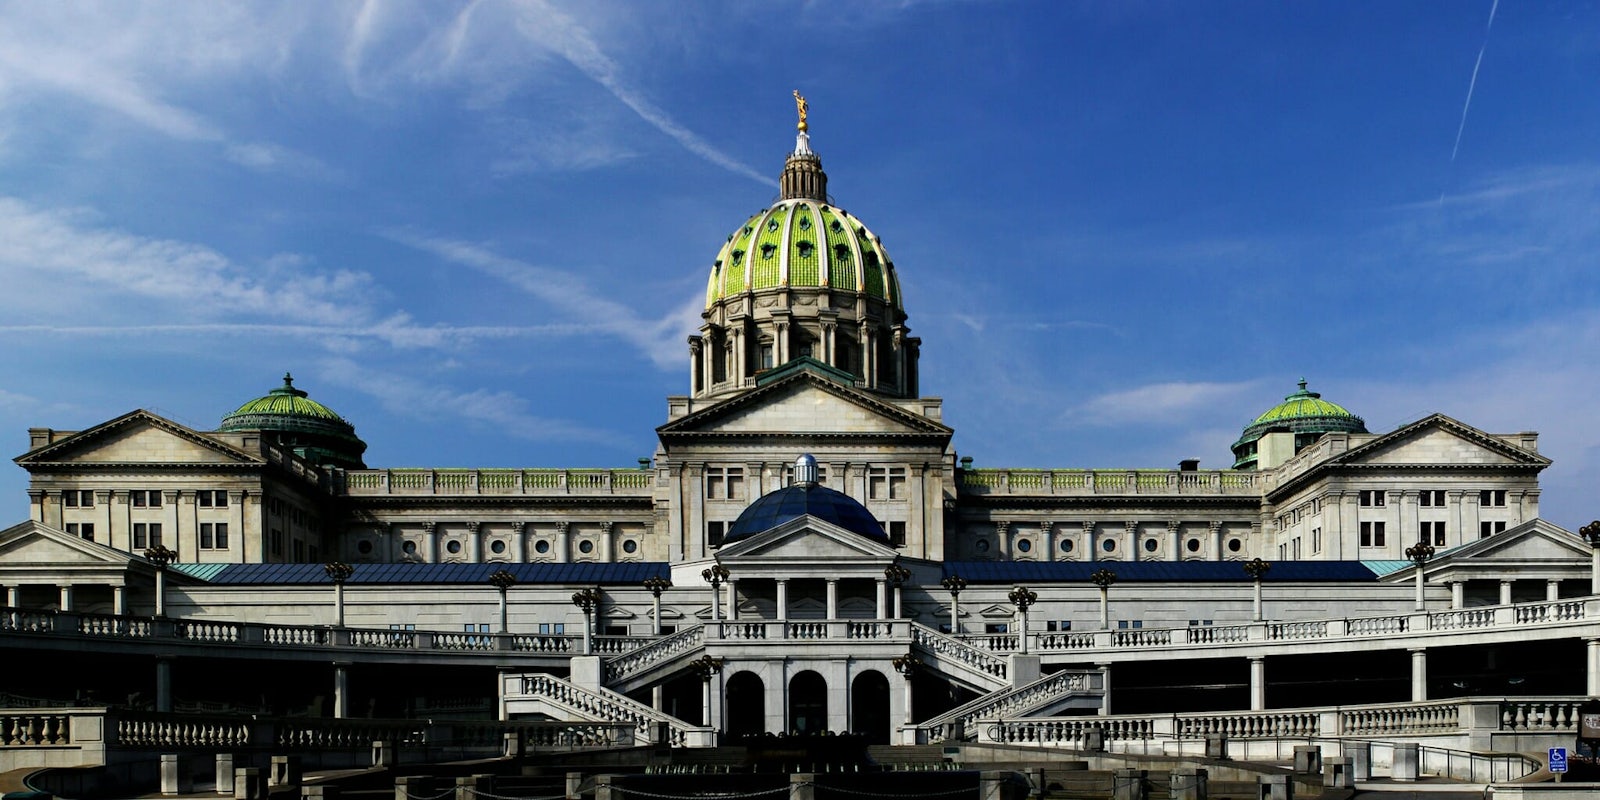 The Pennsylvania State Capitol building in Harrisburg.